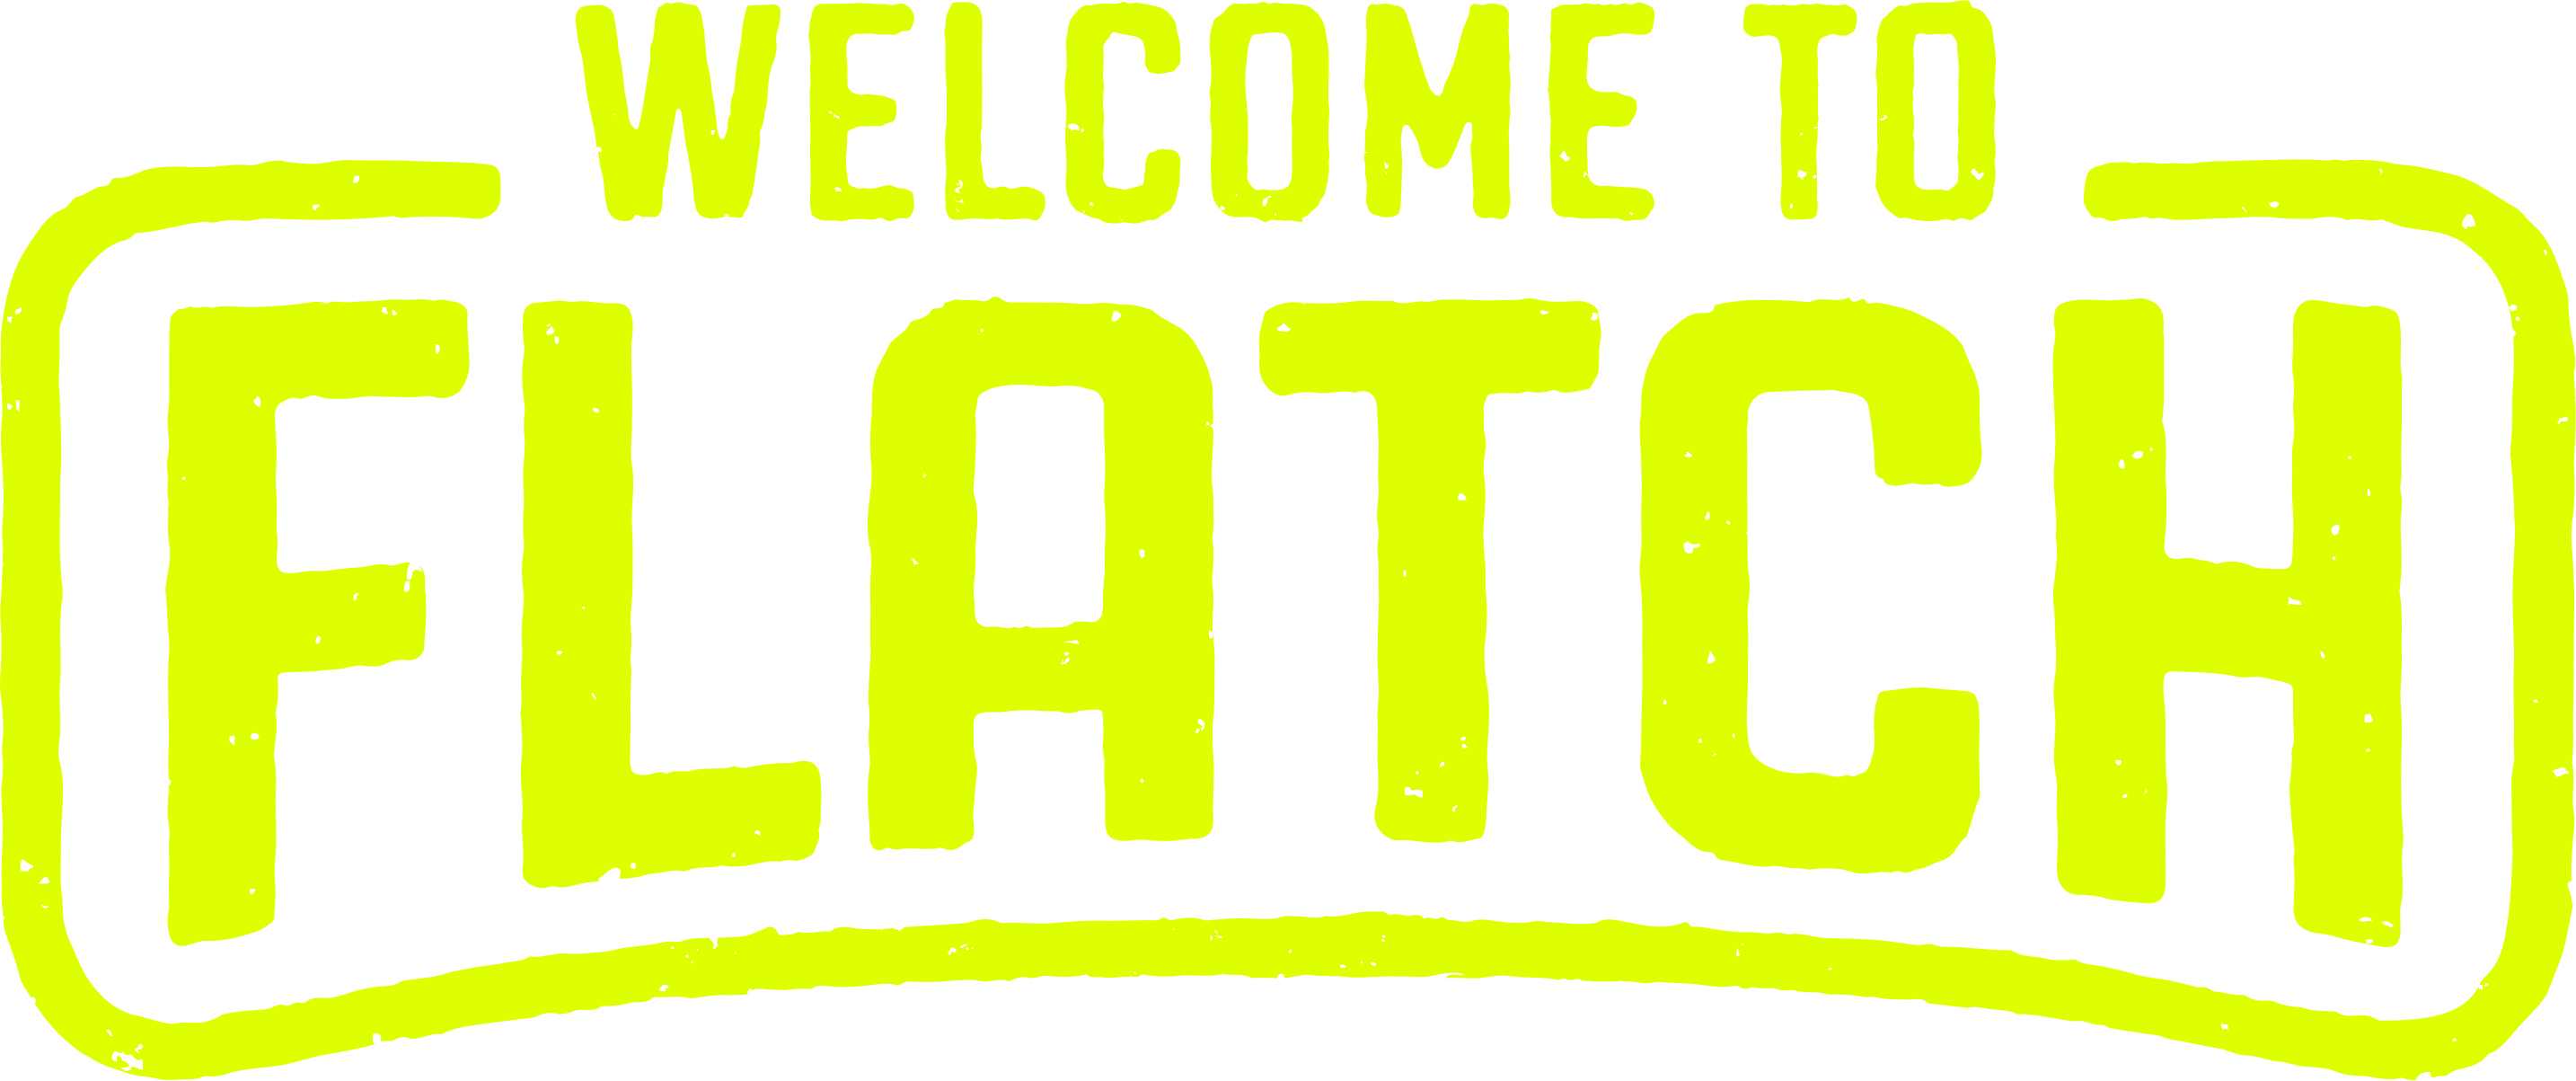 Welcome to Flatch logo